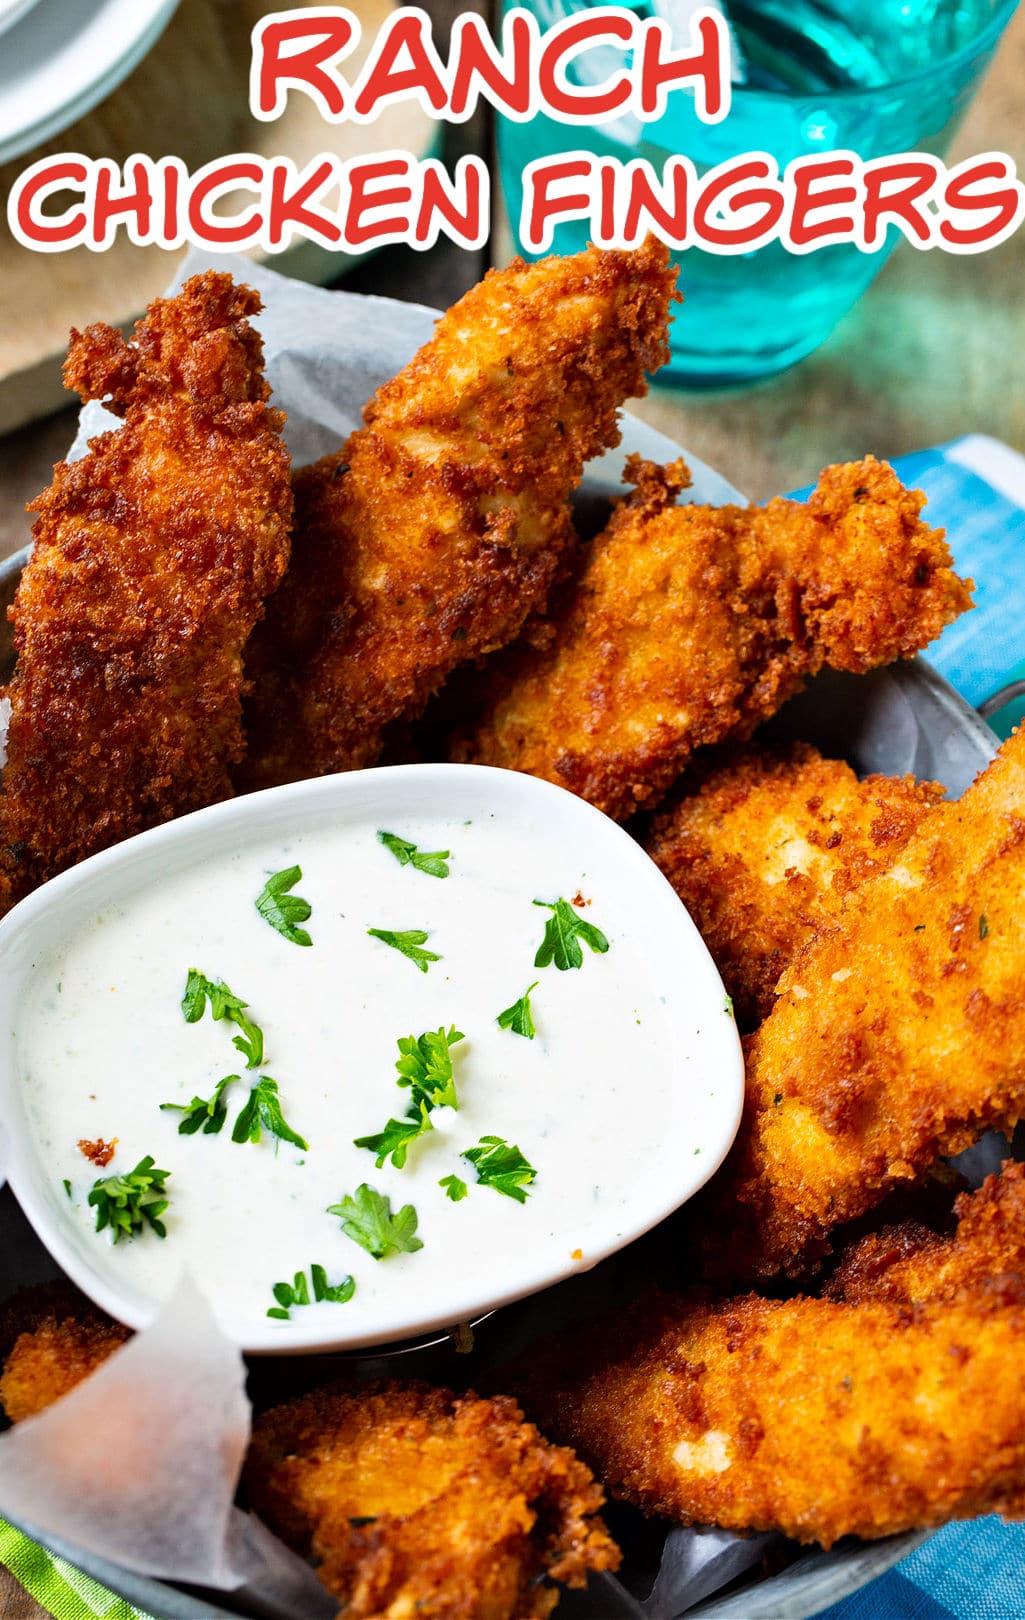 Ranch Chicken Fingers and a bowl with ranch dressing.